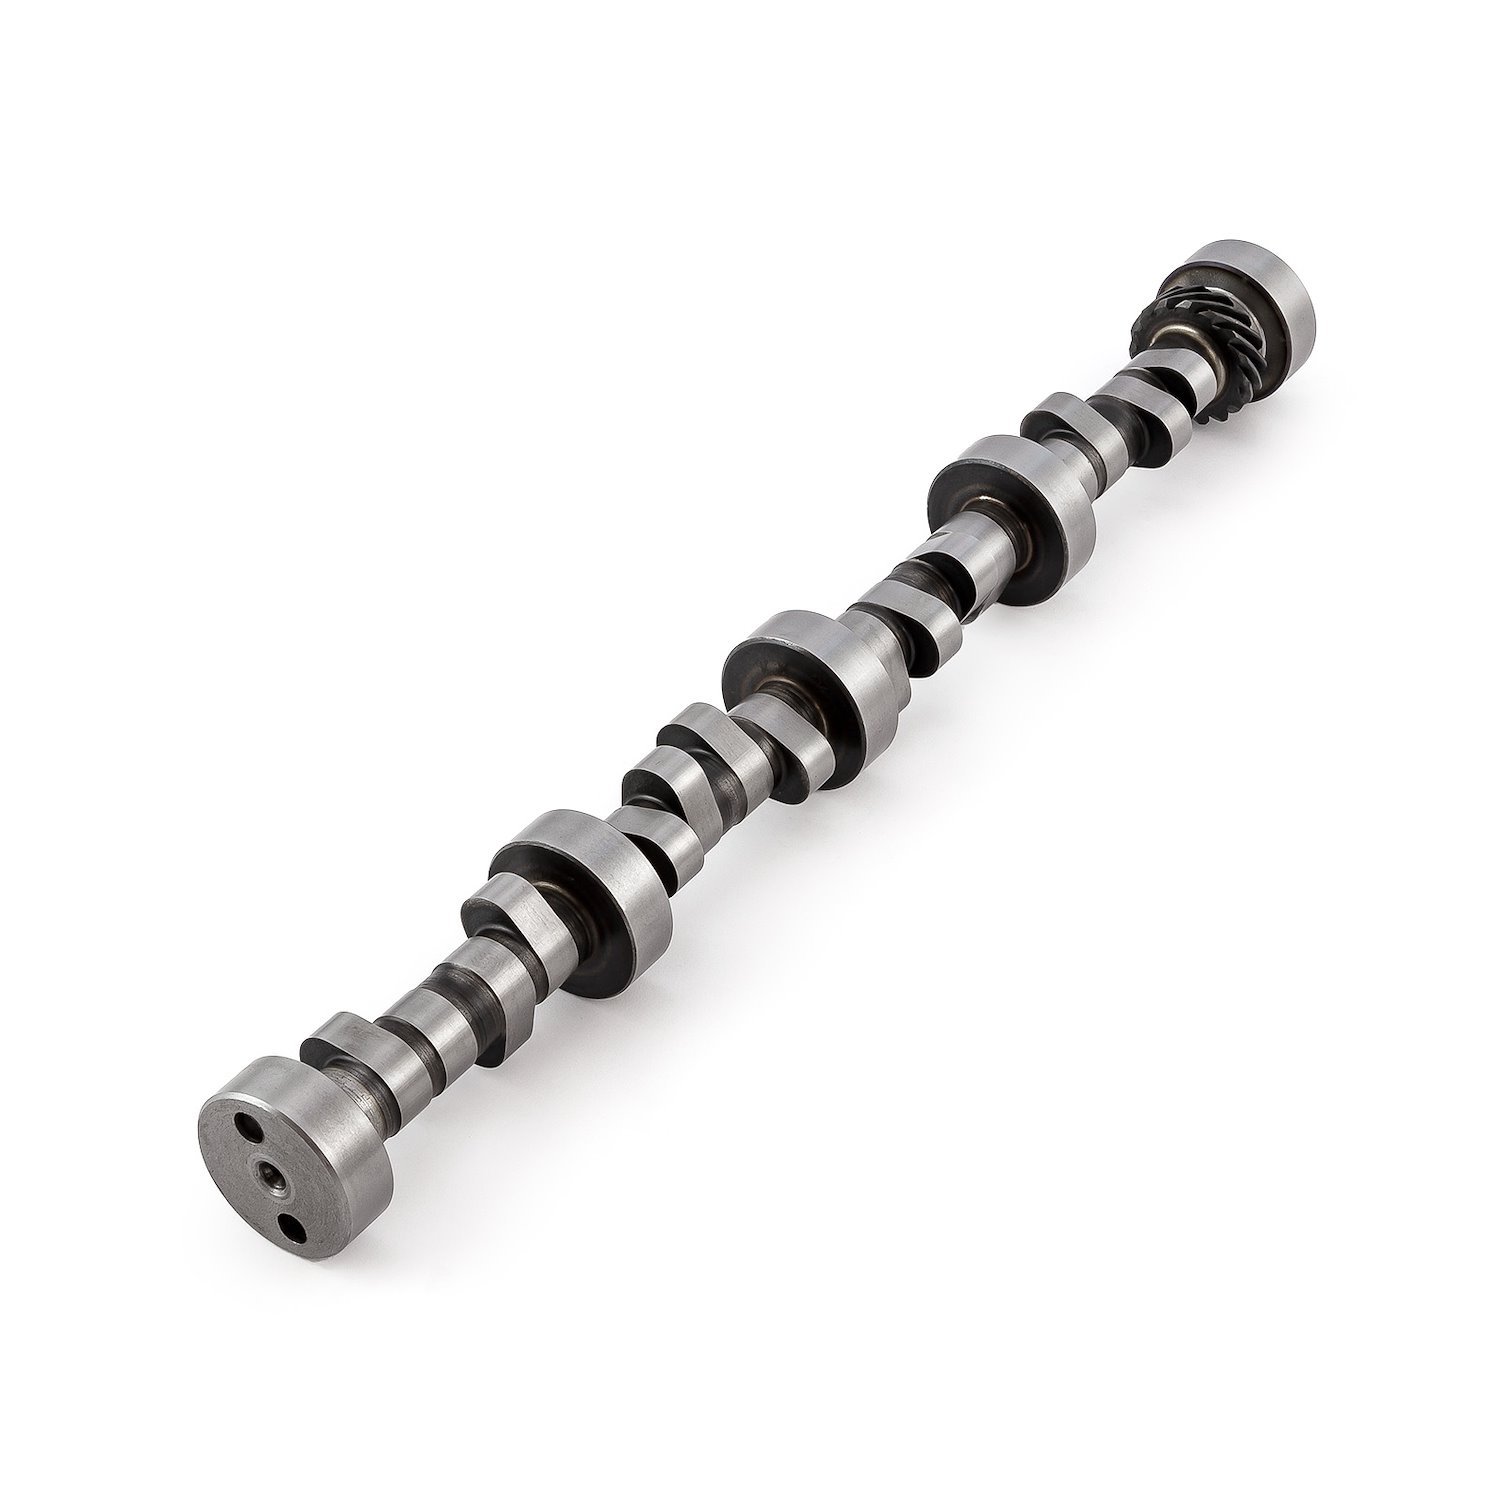 Ford 351 Windsor Hydraulic Roller Camshaft 288 Int. 294 Exh. Duration